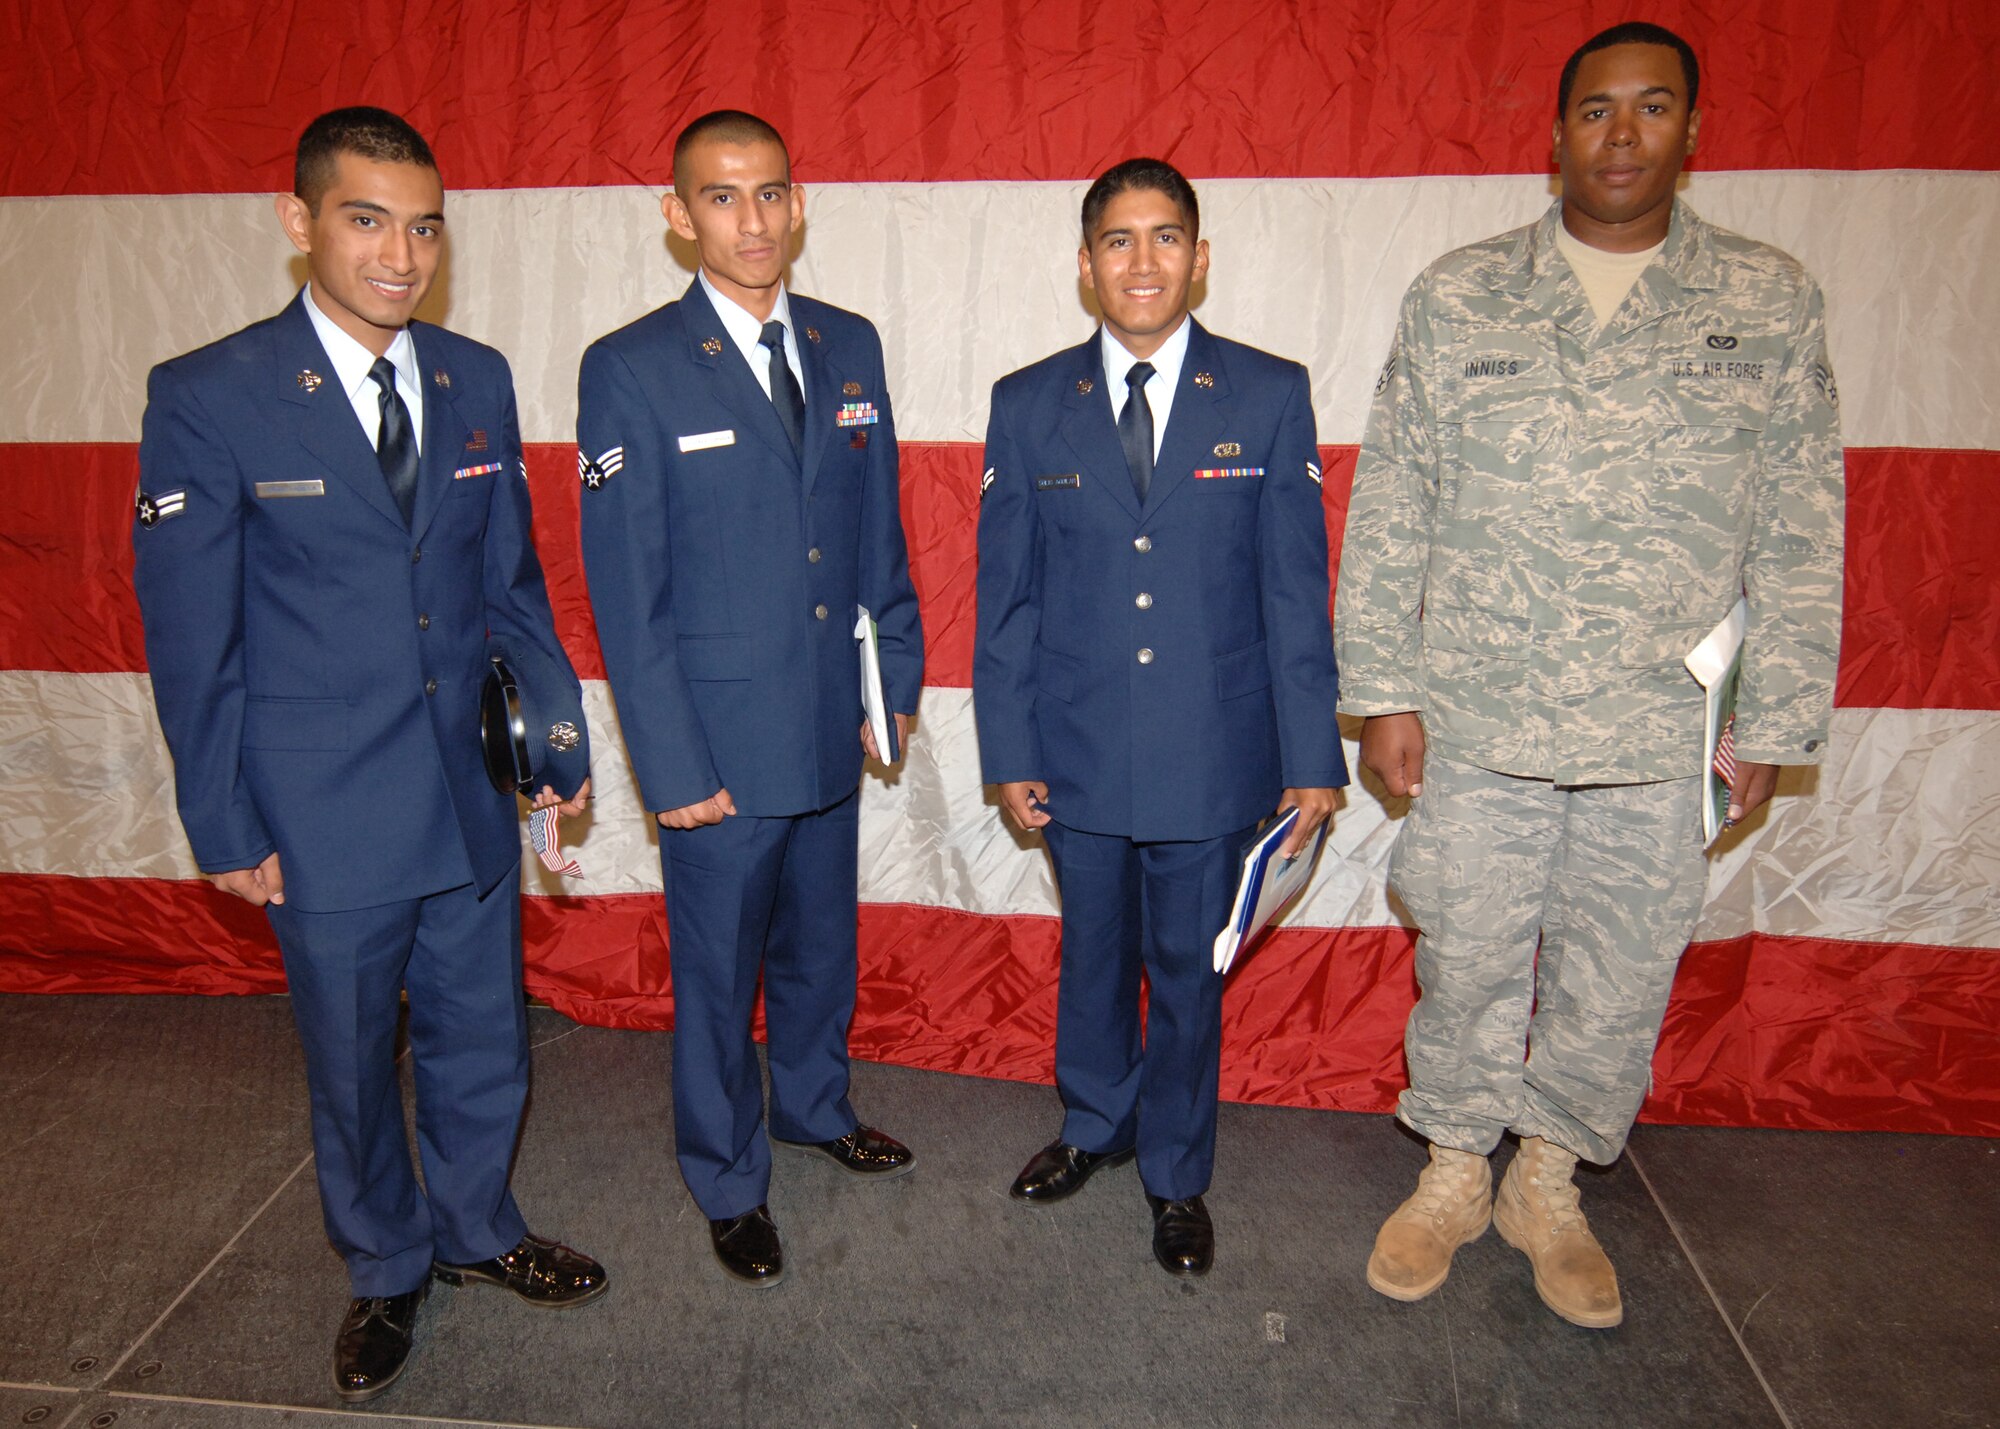 Four Airmen from  Holloman Air Force Base, N.M., pose after their naturalization ceremony, September 24. More than 1,200 applicants were granted U.S. citizenship at the Convention and Performing Arts Center that was transformed into a federal court room in El Paso, Texas.  (U.S. Air Force photo/Airman 1st Class Michael Means)